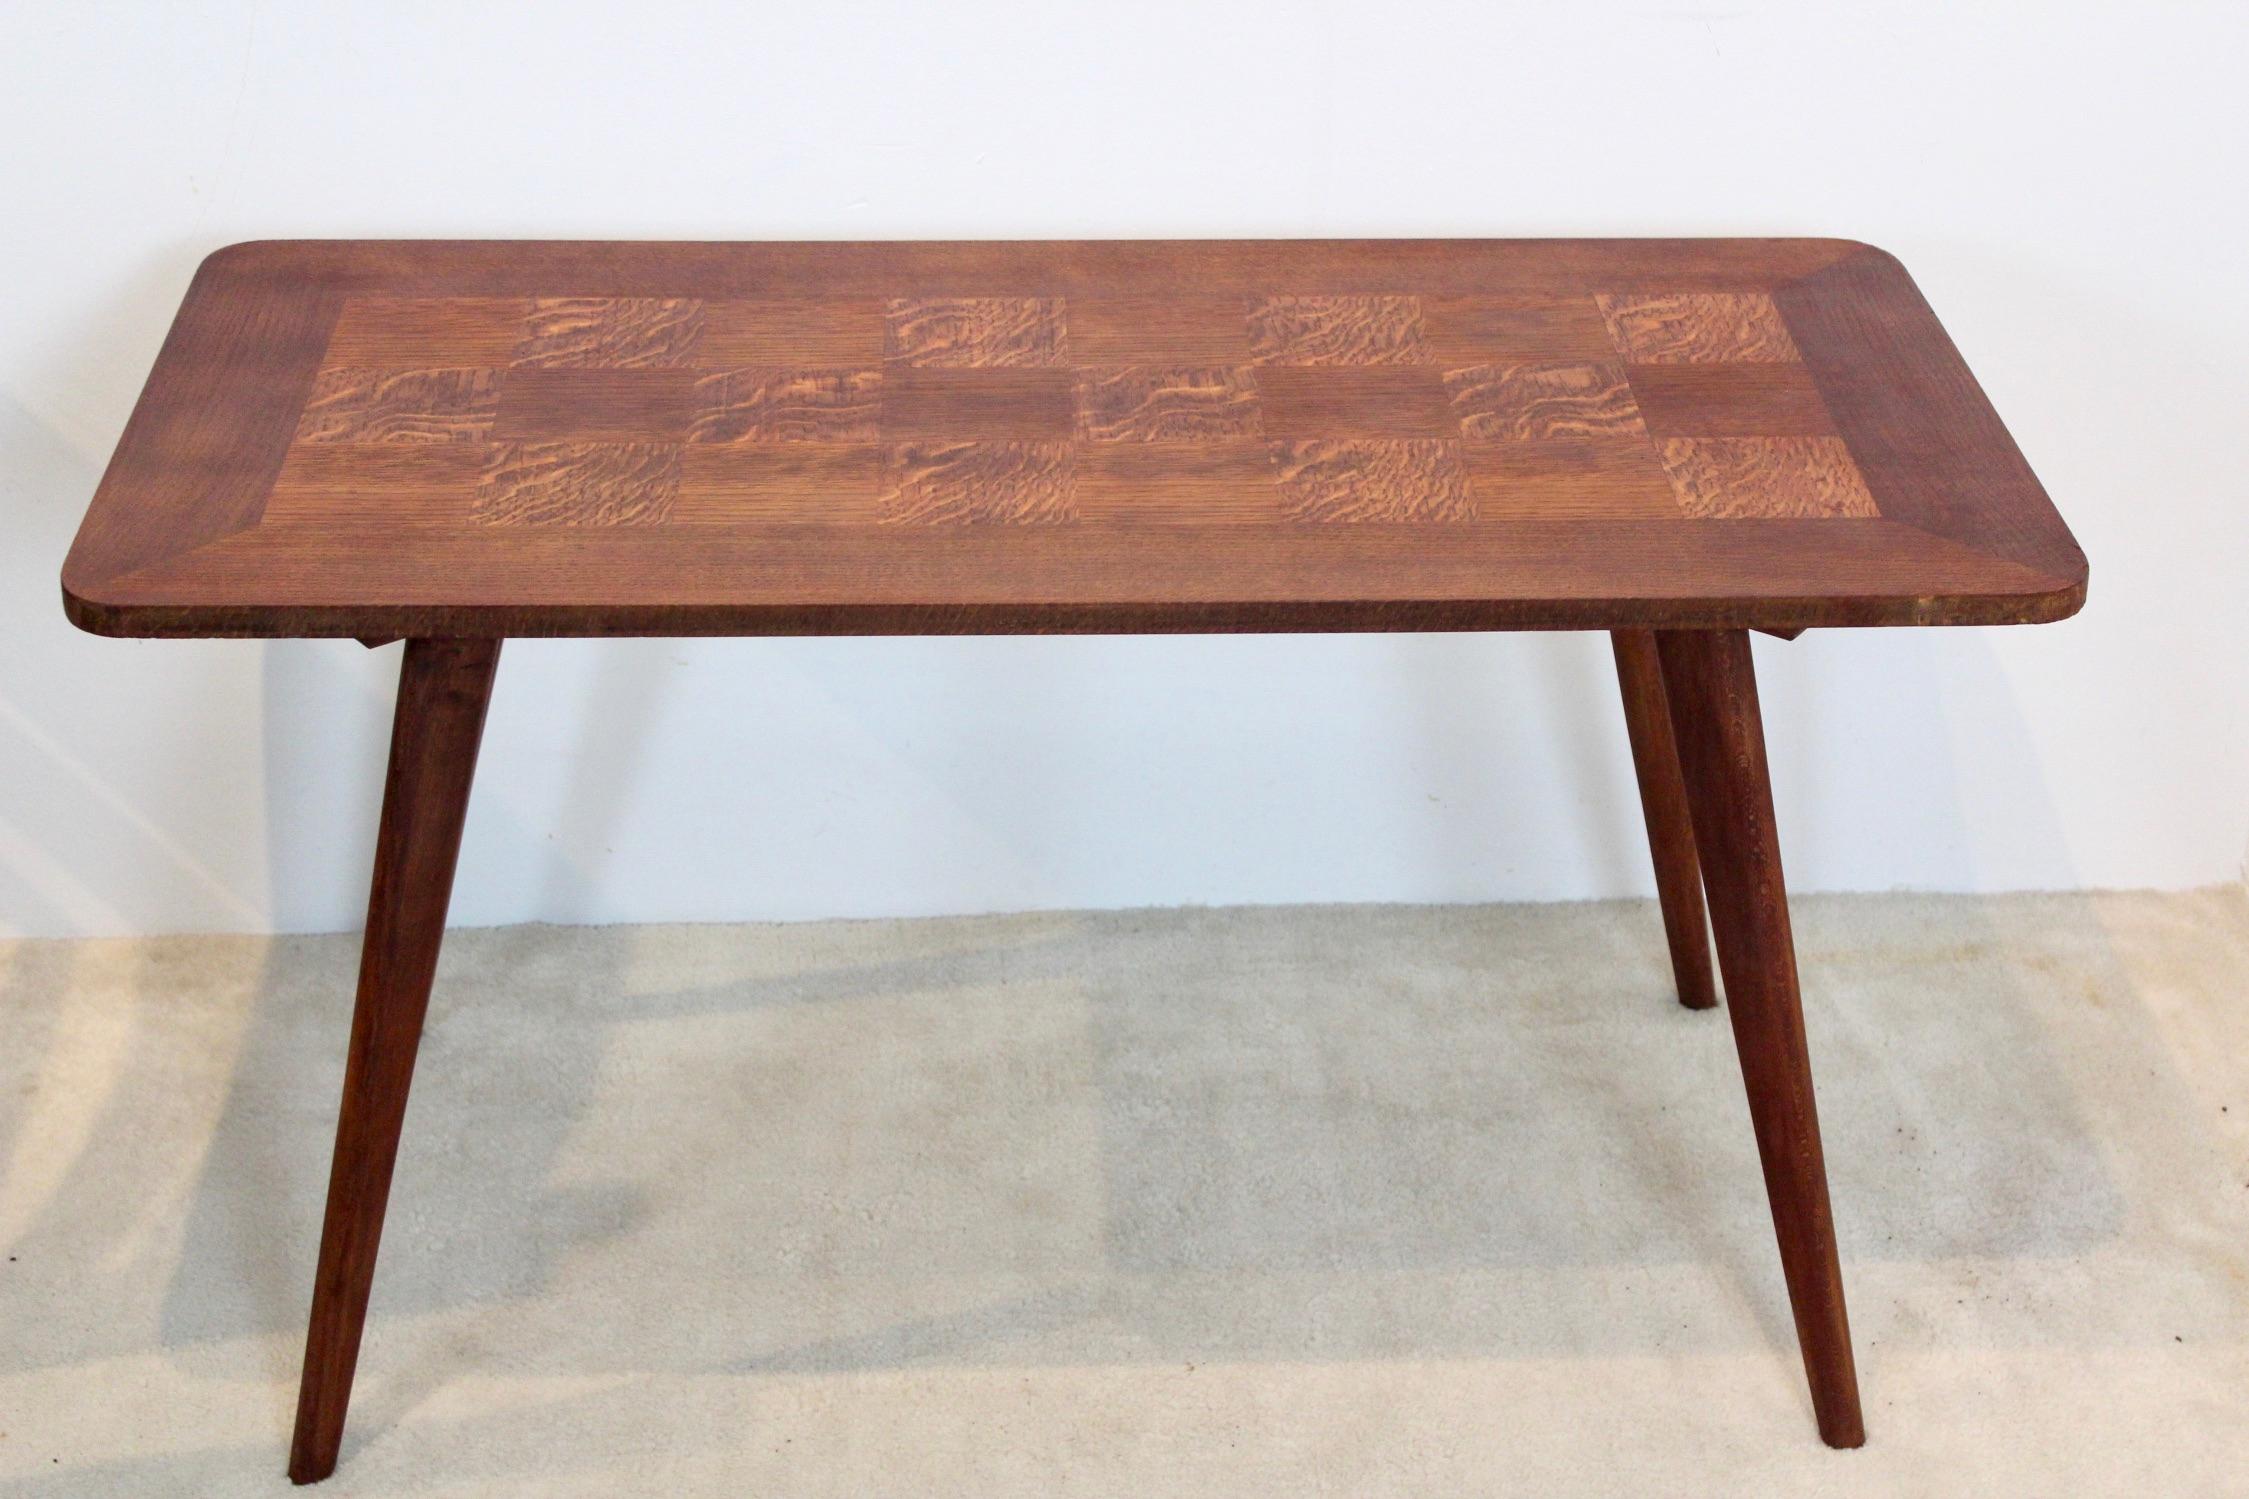 20th Century Oak Wood Coffee Table with Veneer Inlay, 1950s For Sale